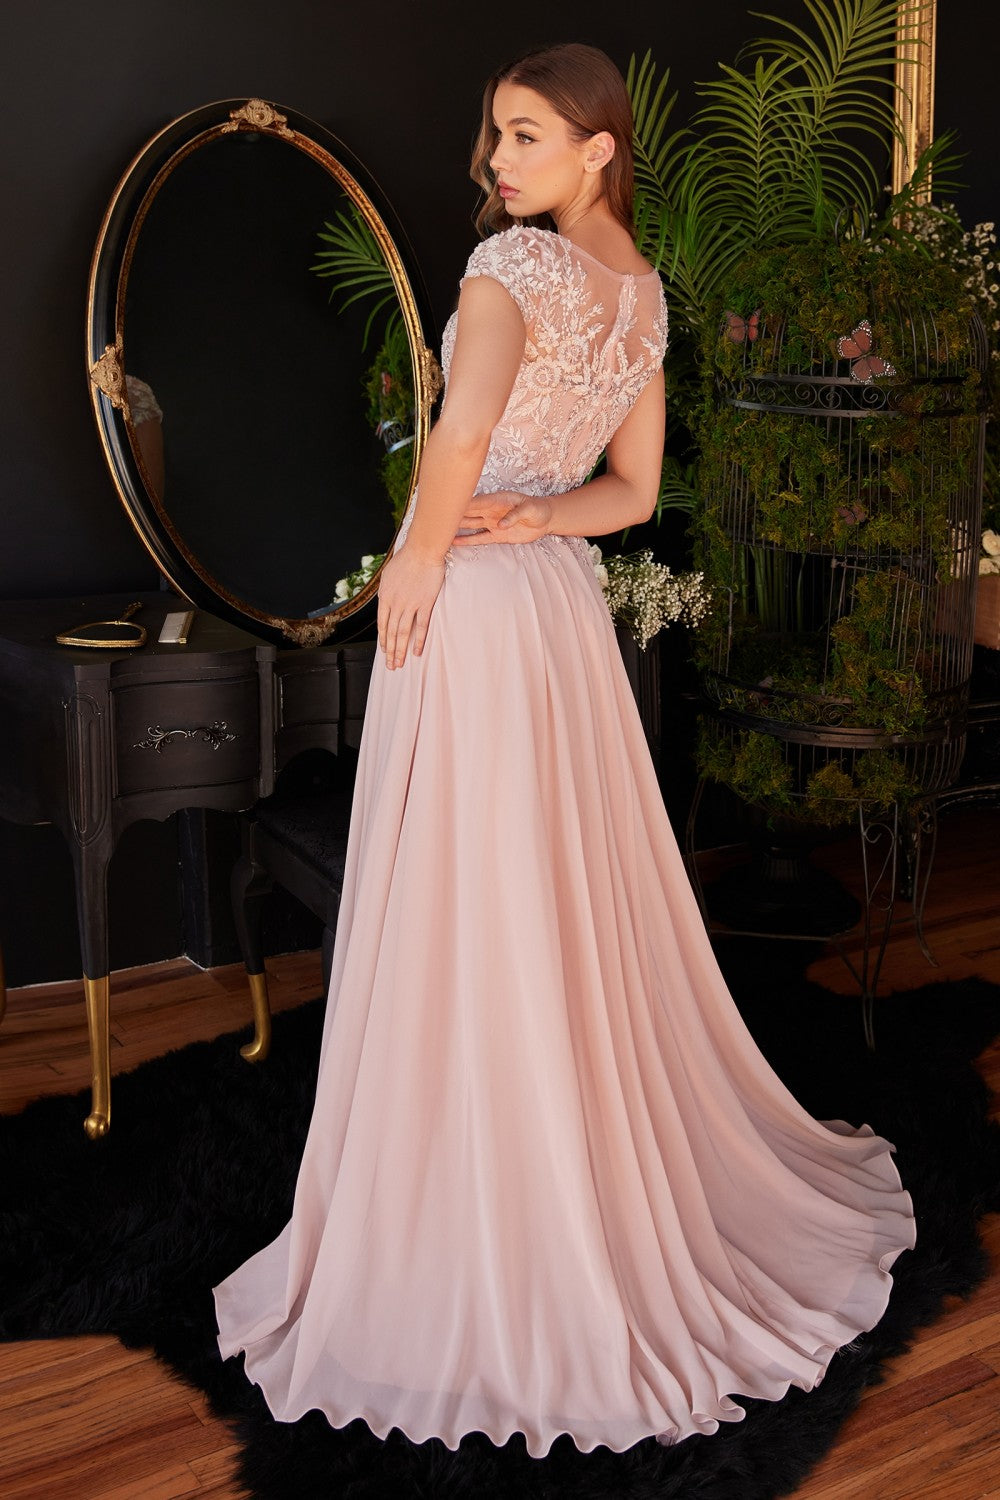 Lace Embellished Cap sleeve Bodice Vintage a-line Modest Romantic chiffon Prom & Bridesmaid dress Formal Tender Pretty Gown CDCL05 Elsy Style Mother of the Bride Dress